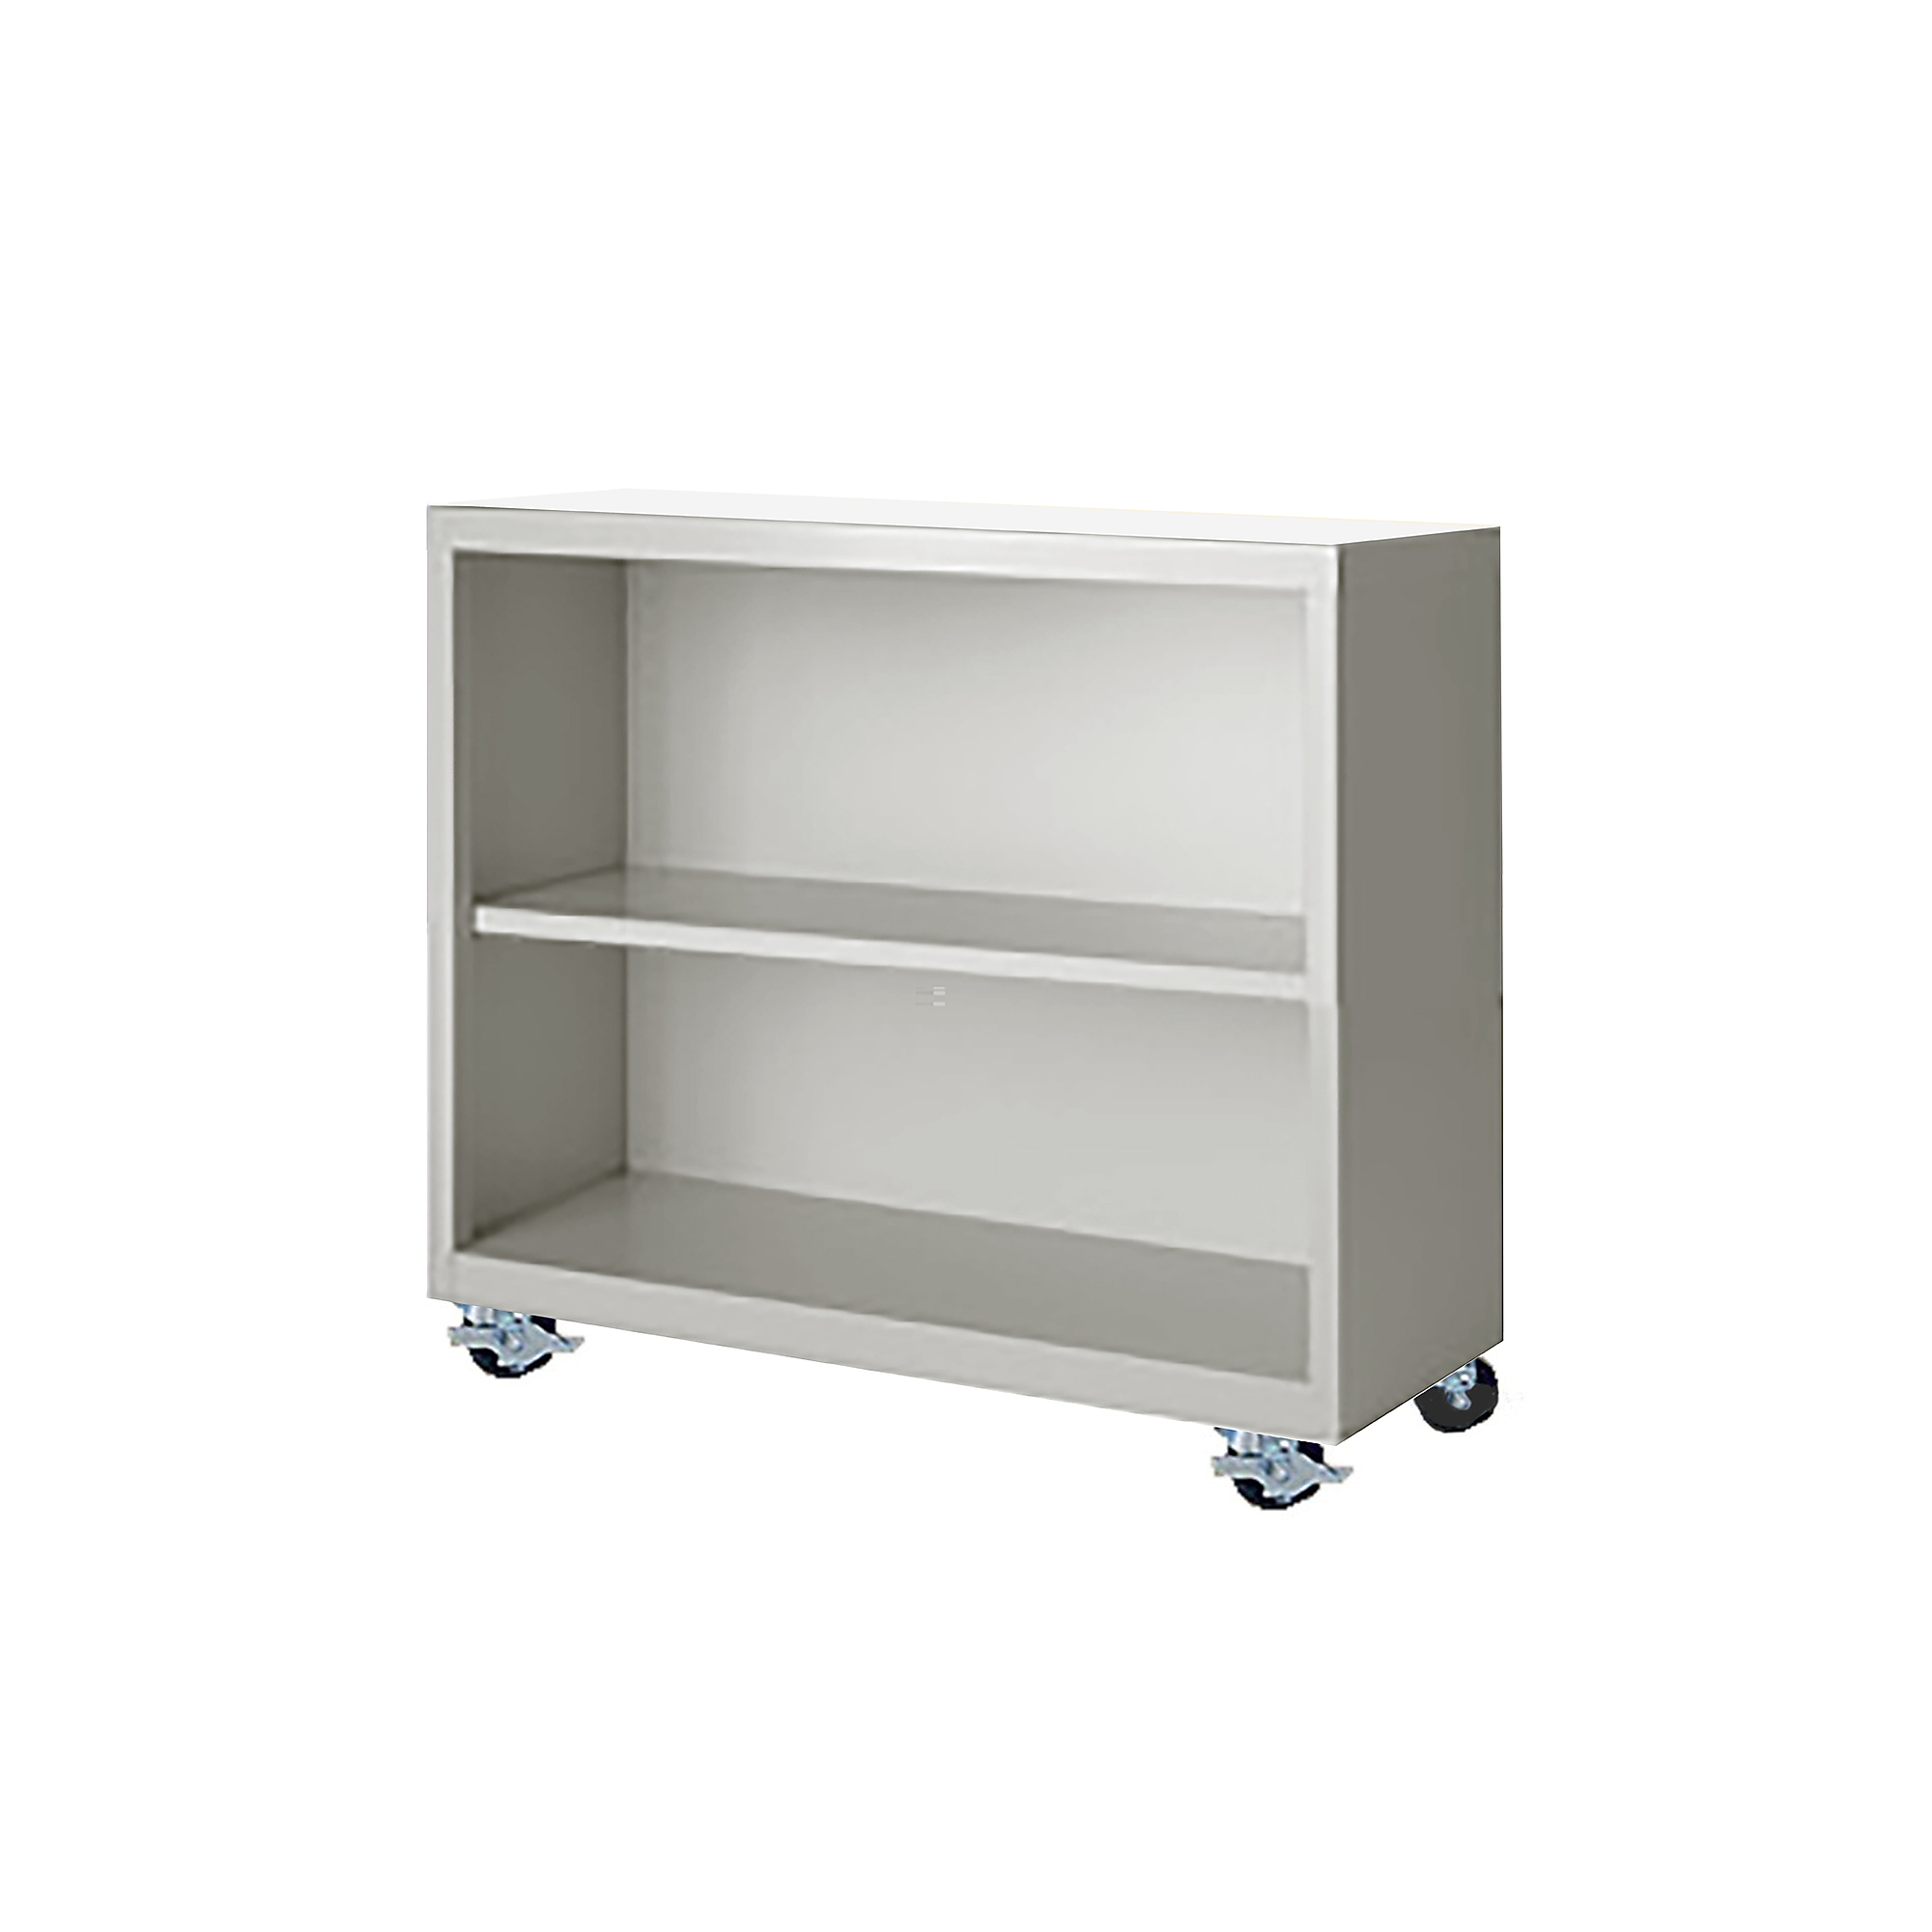 Steel Cabinets USA, 36Inchx18Inchx33Inch Putty Mobile Bookcase Fully Assembled, Height 33 in, Shelves (qty.) 2, Material Steel, Model MBCA-363318-P